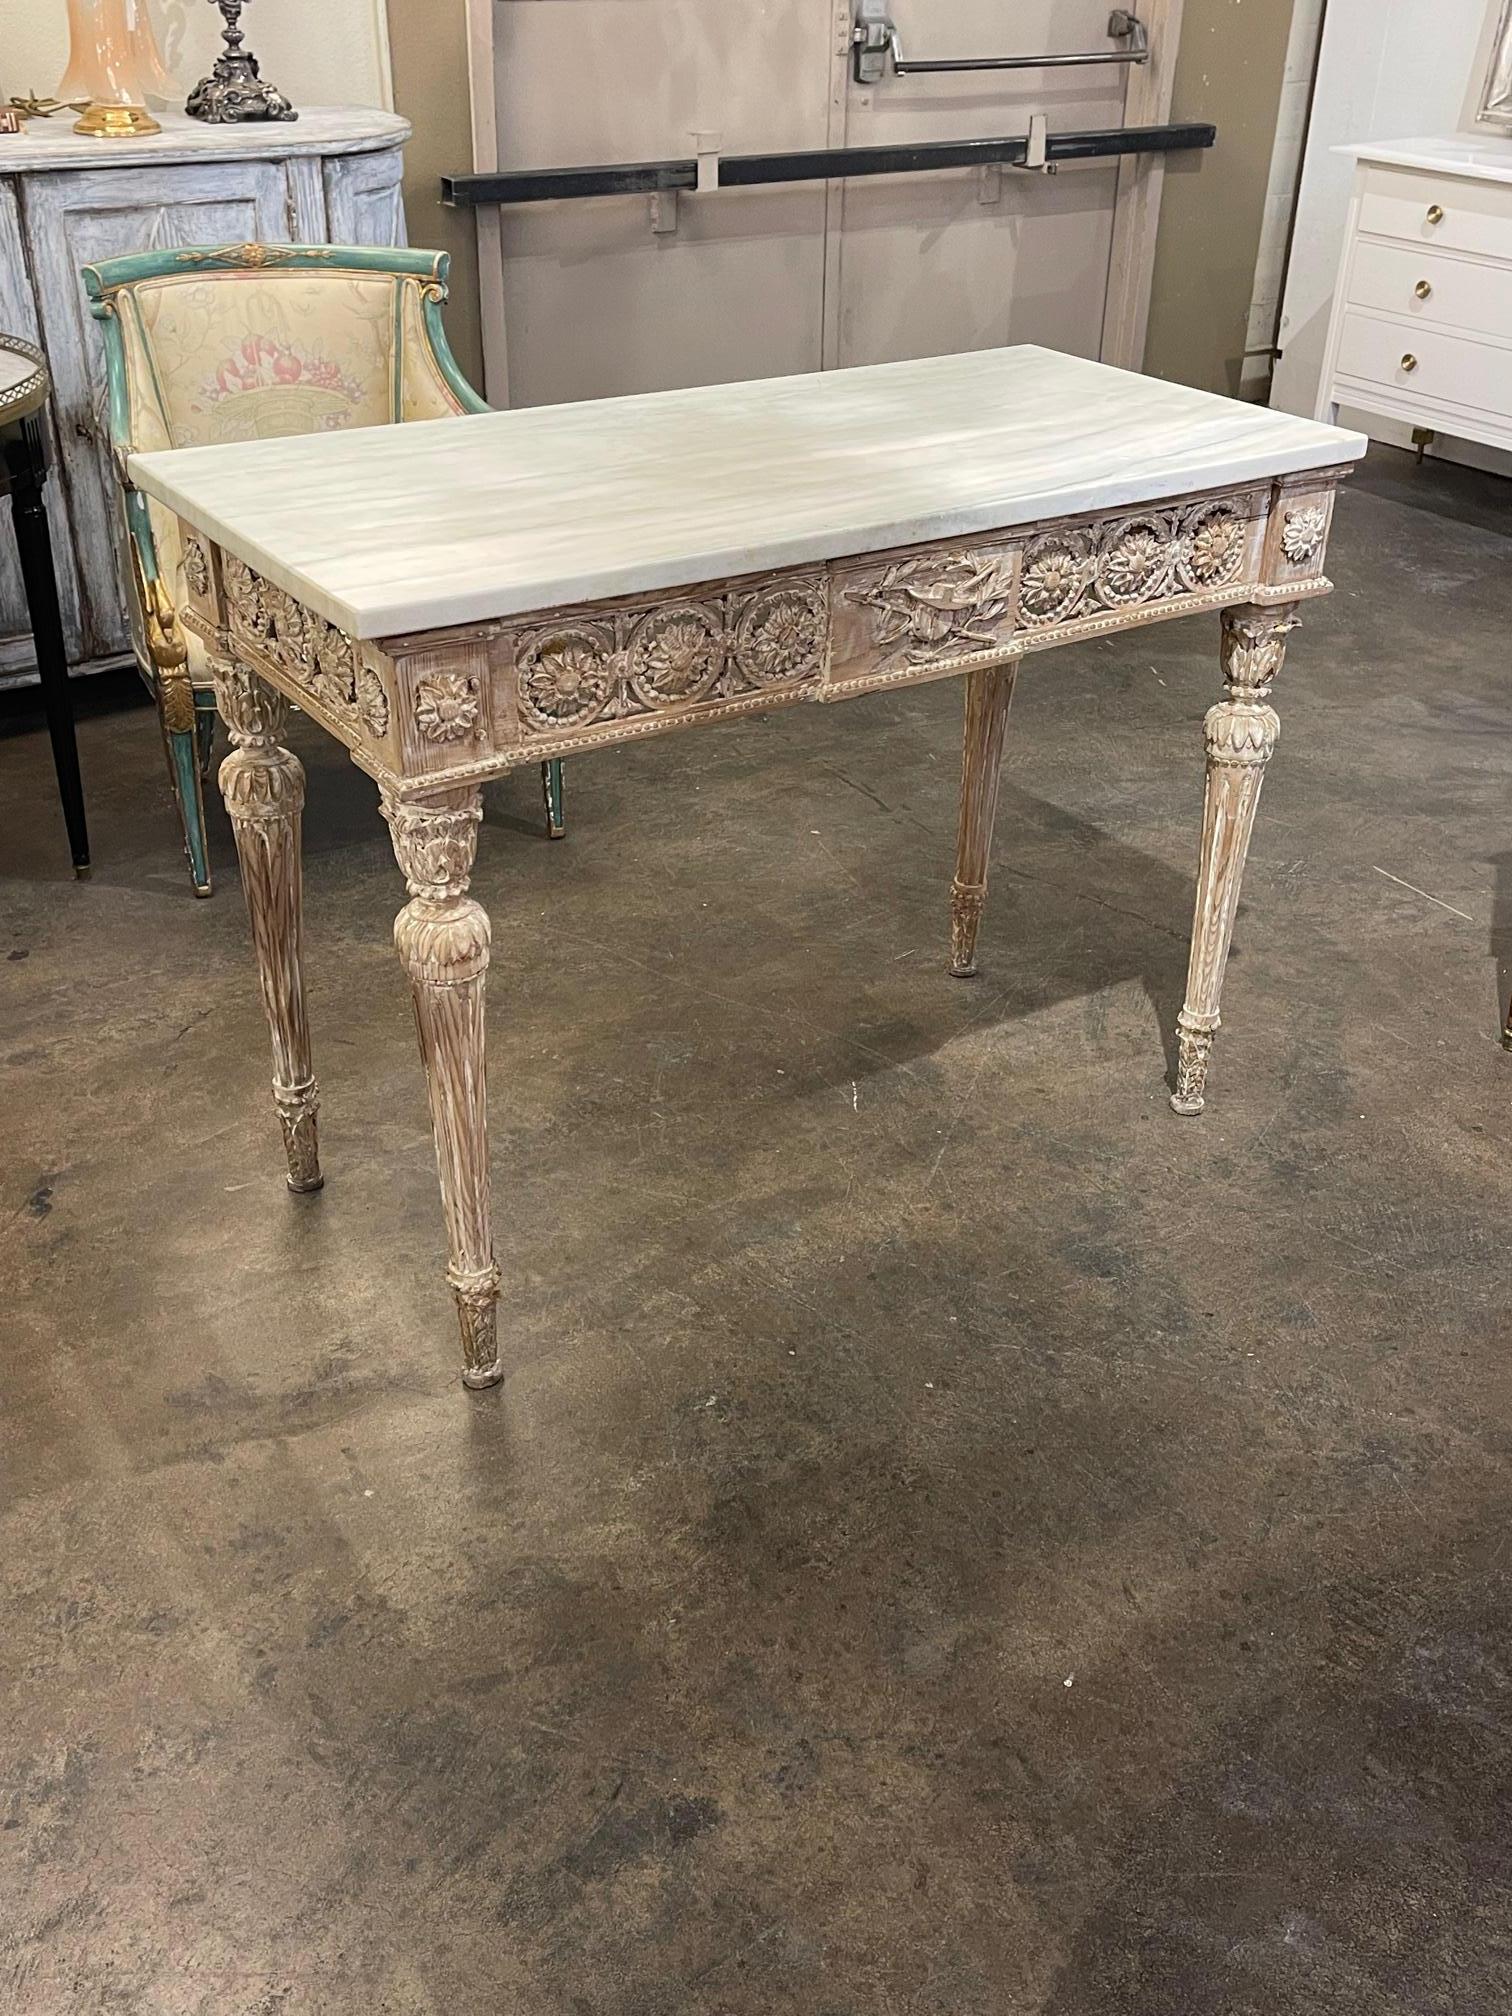 19th century Italian Neo-Classical carved and white-washed console with marble top, Circa 1870. Nicely carved with a beautiful patina. A fine addition to any home.